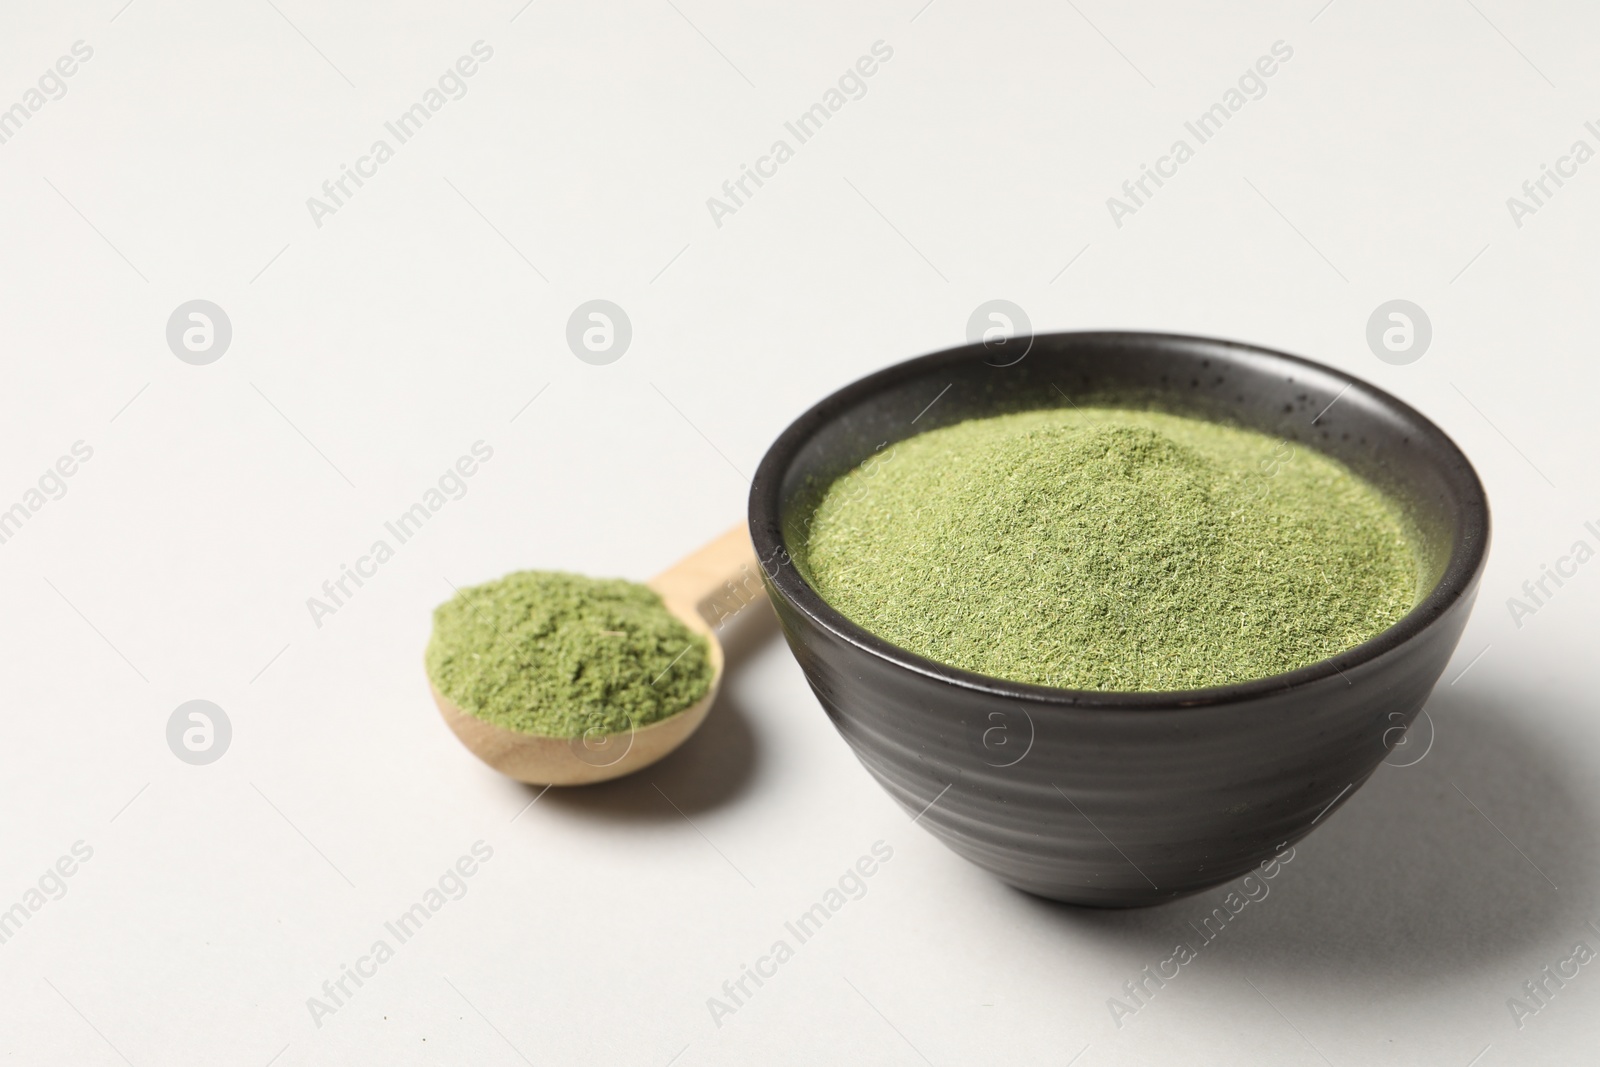 Photo of Wheat grass powder in bowl and spoon on light table